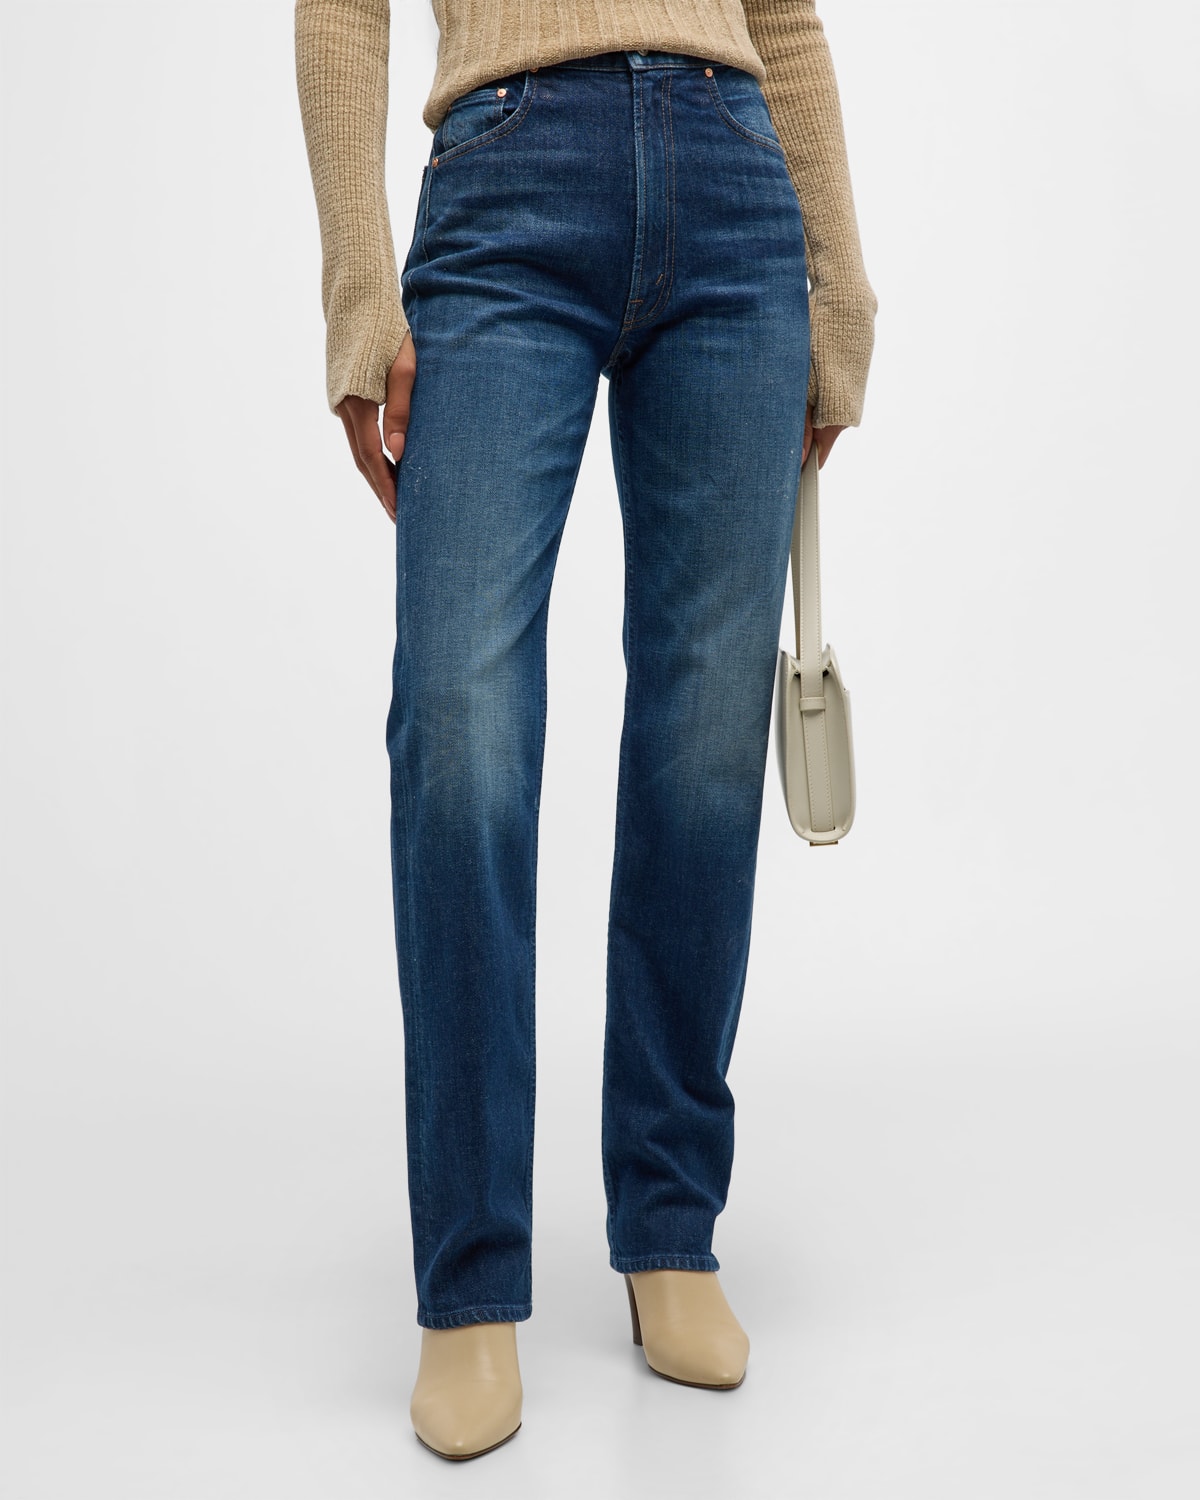 The High Waisted Rider Shift Sneak Jeans